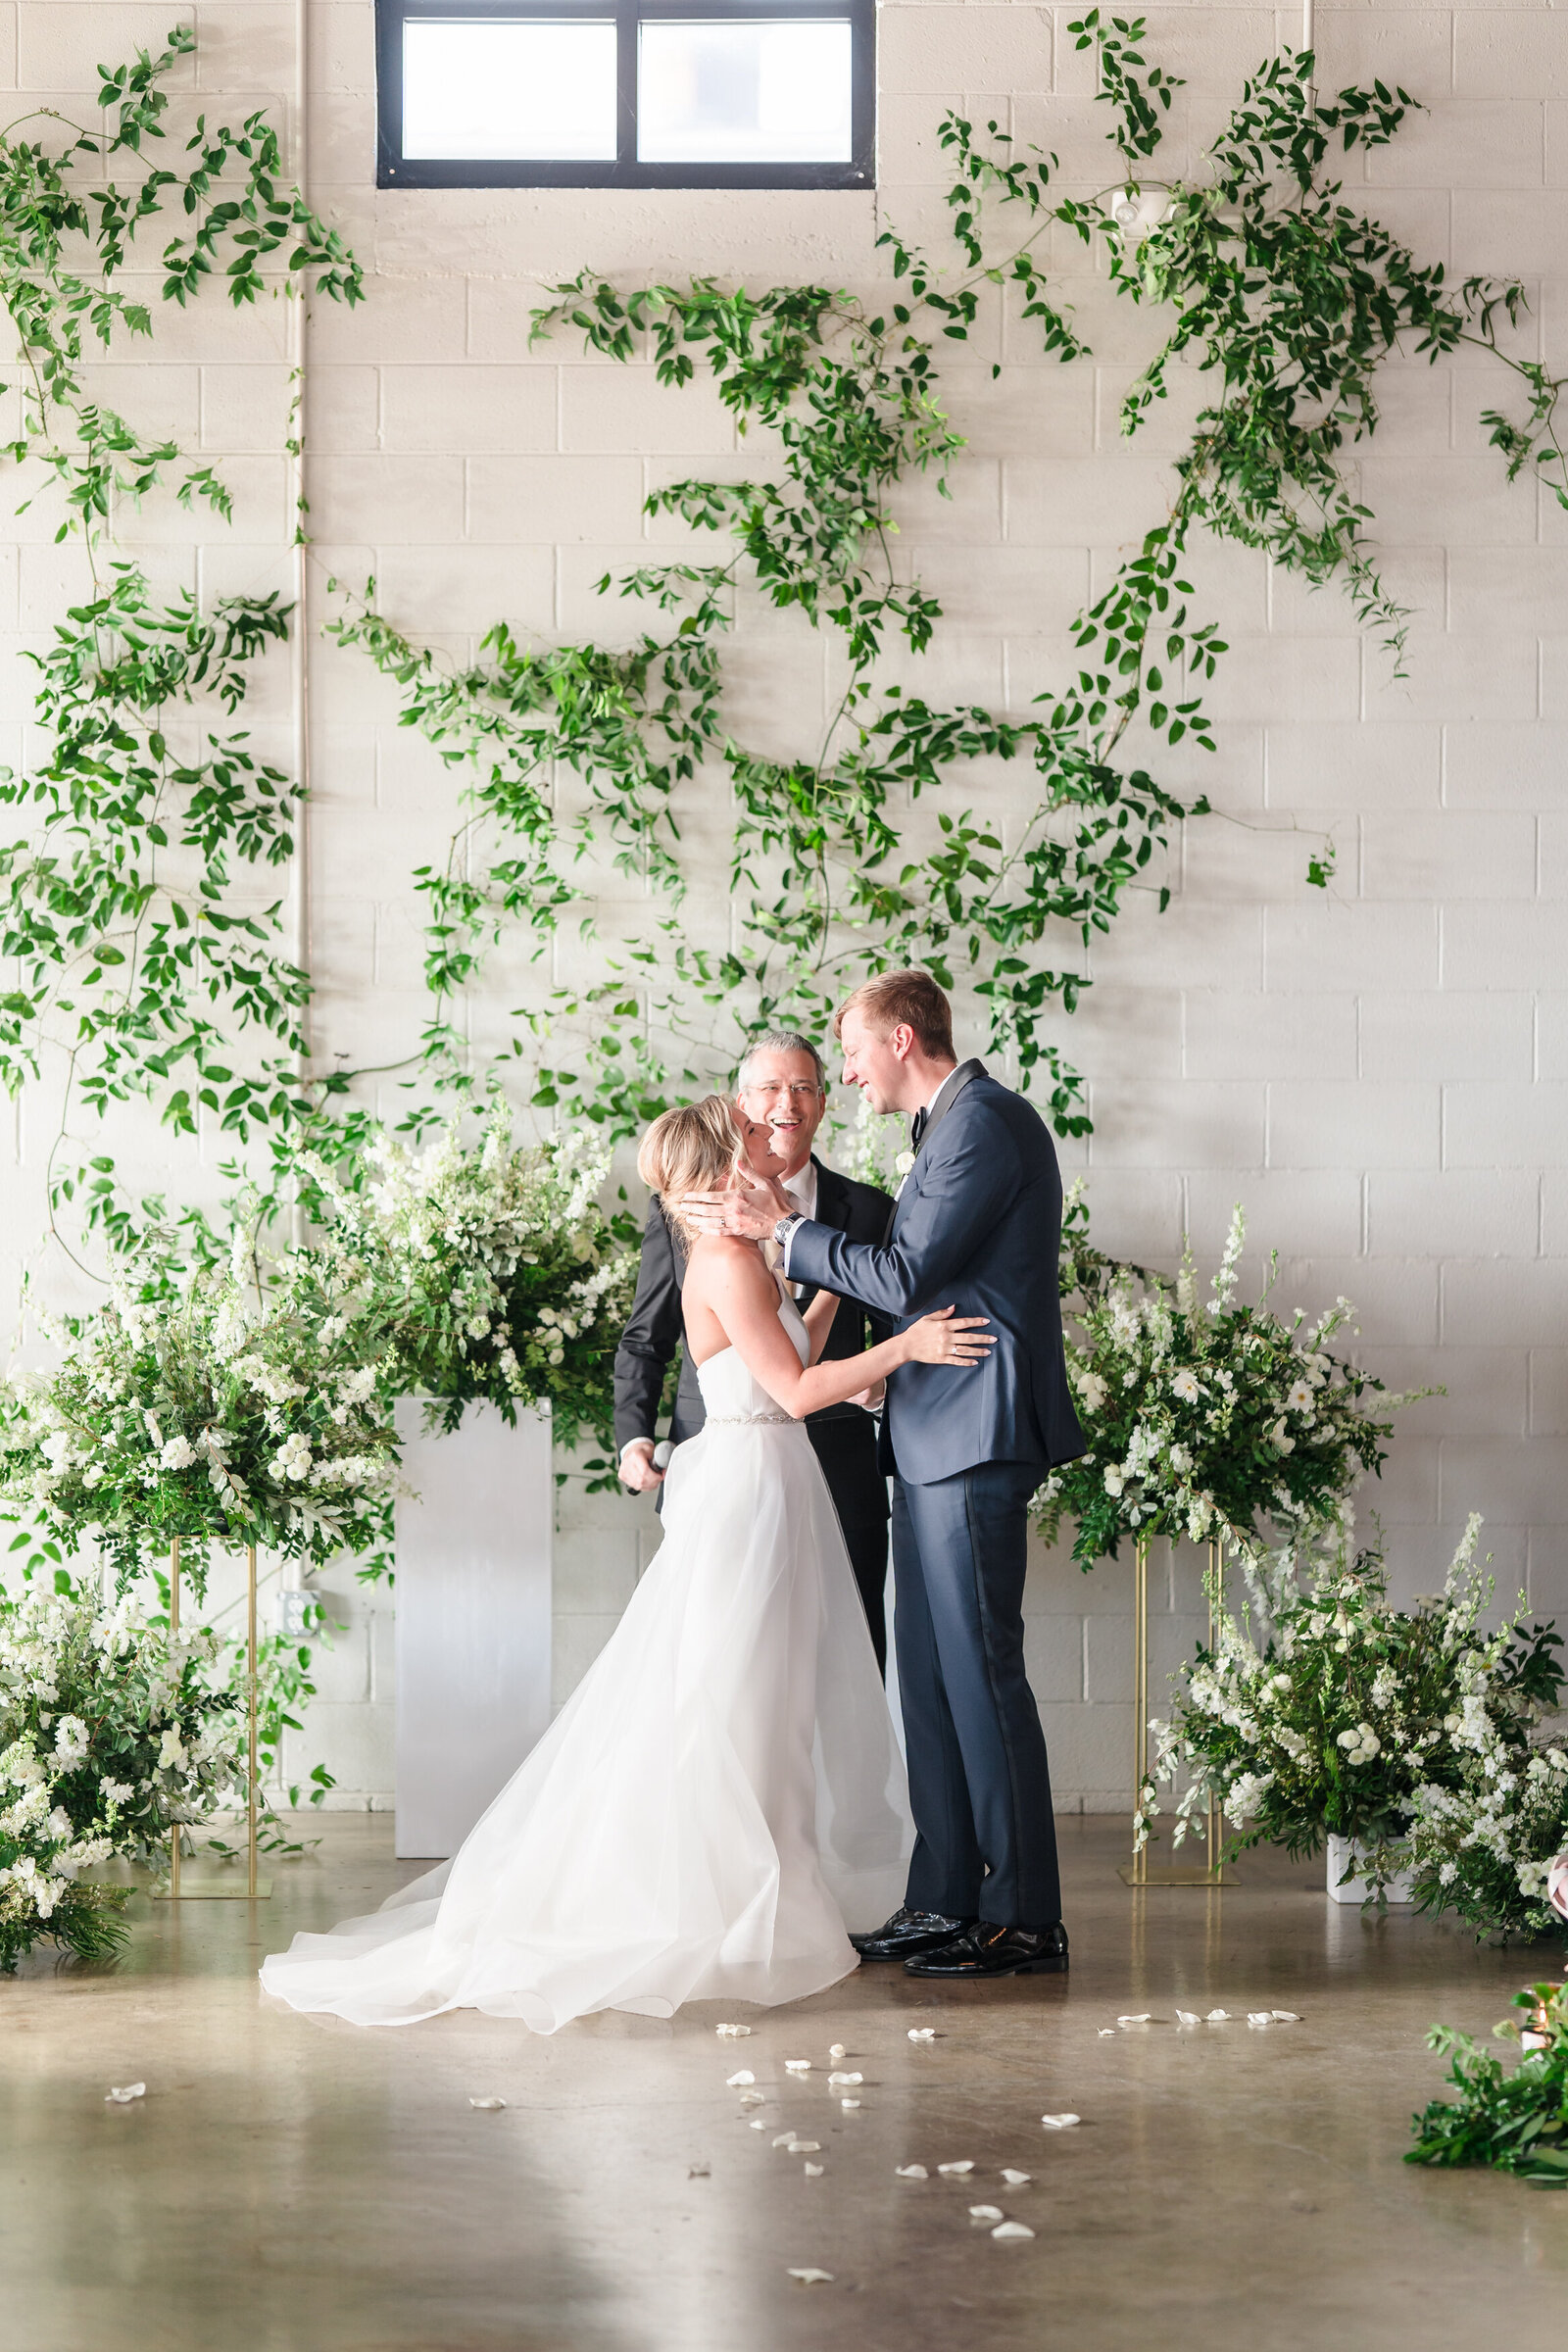 A bride and groom lean in for their first kiss surrounded by green florals with white flowers